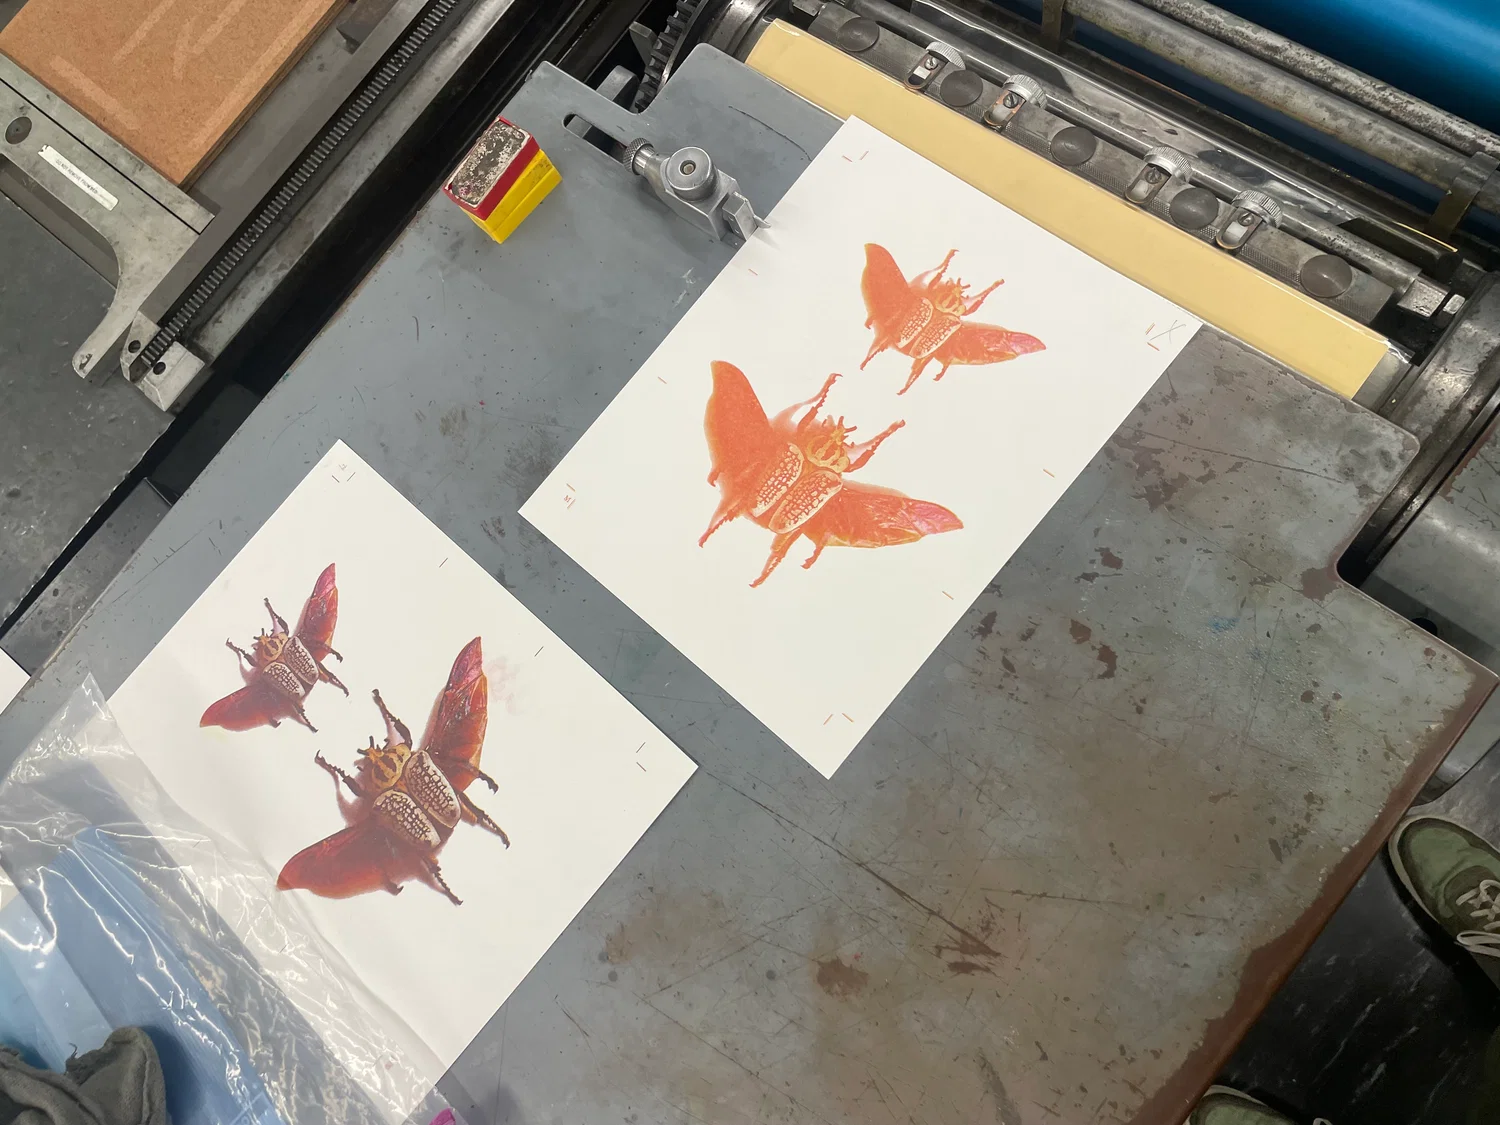 At the letterpress, showing a print in progress next to a finished print